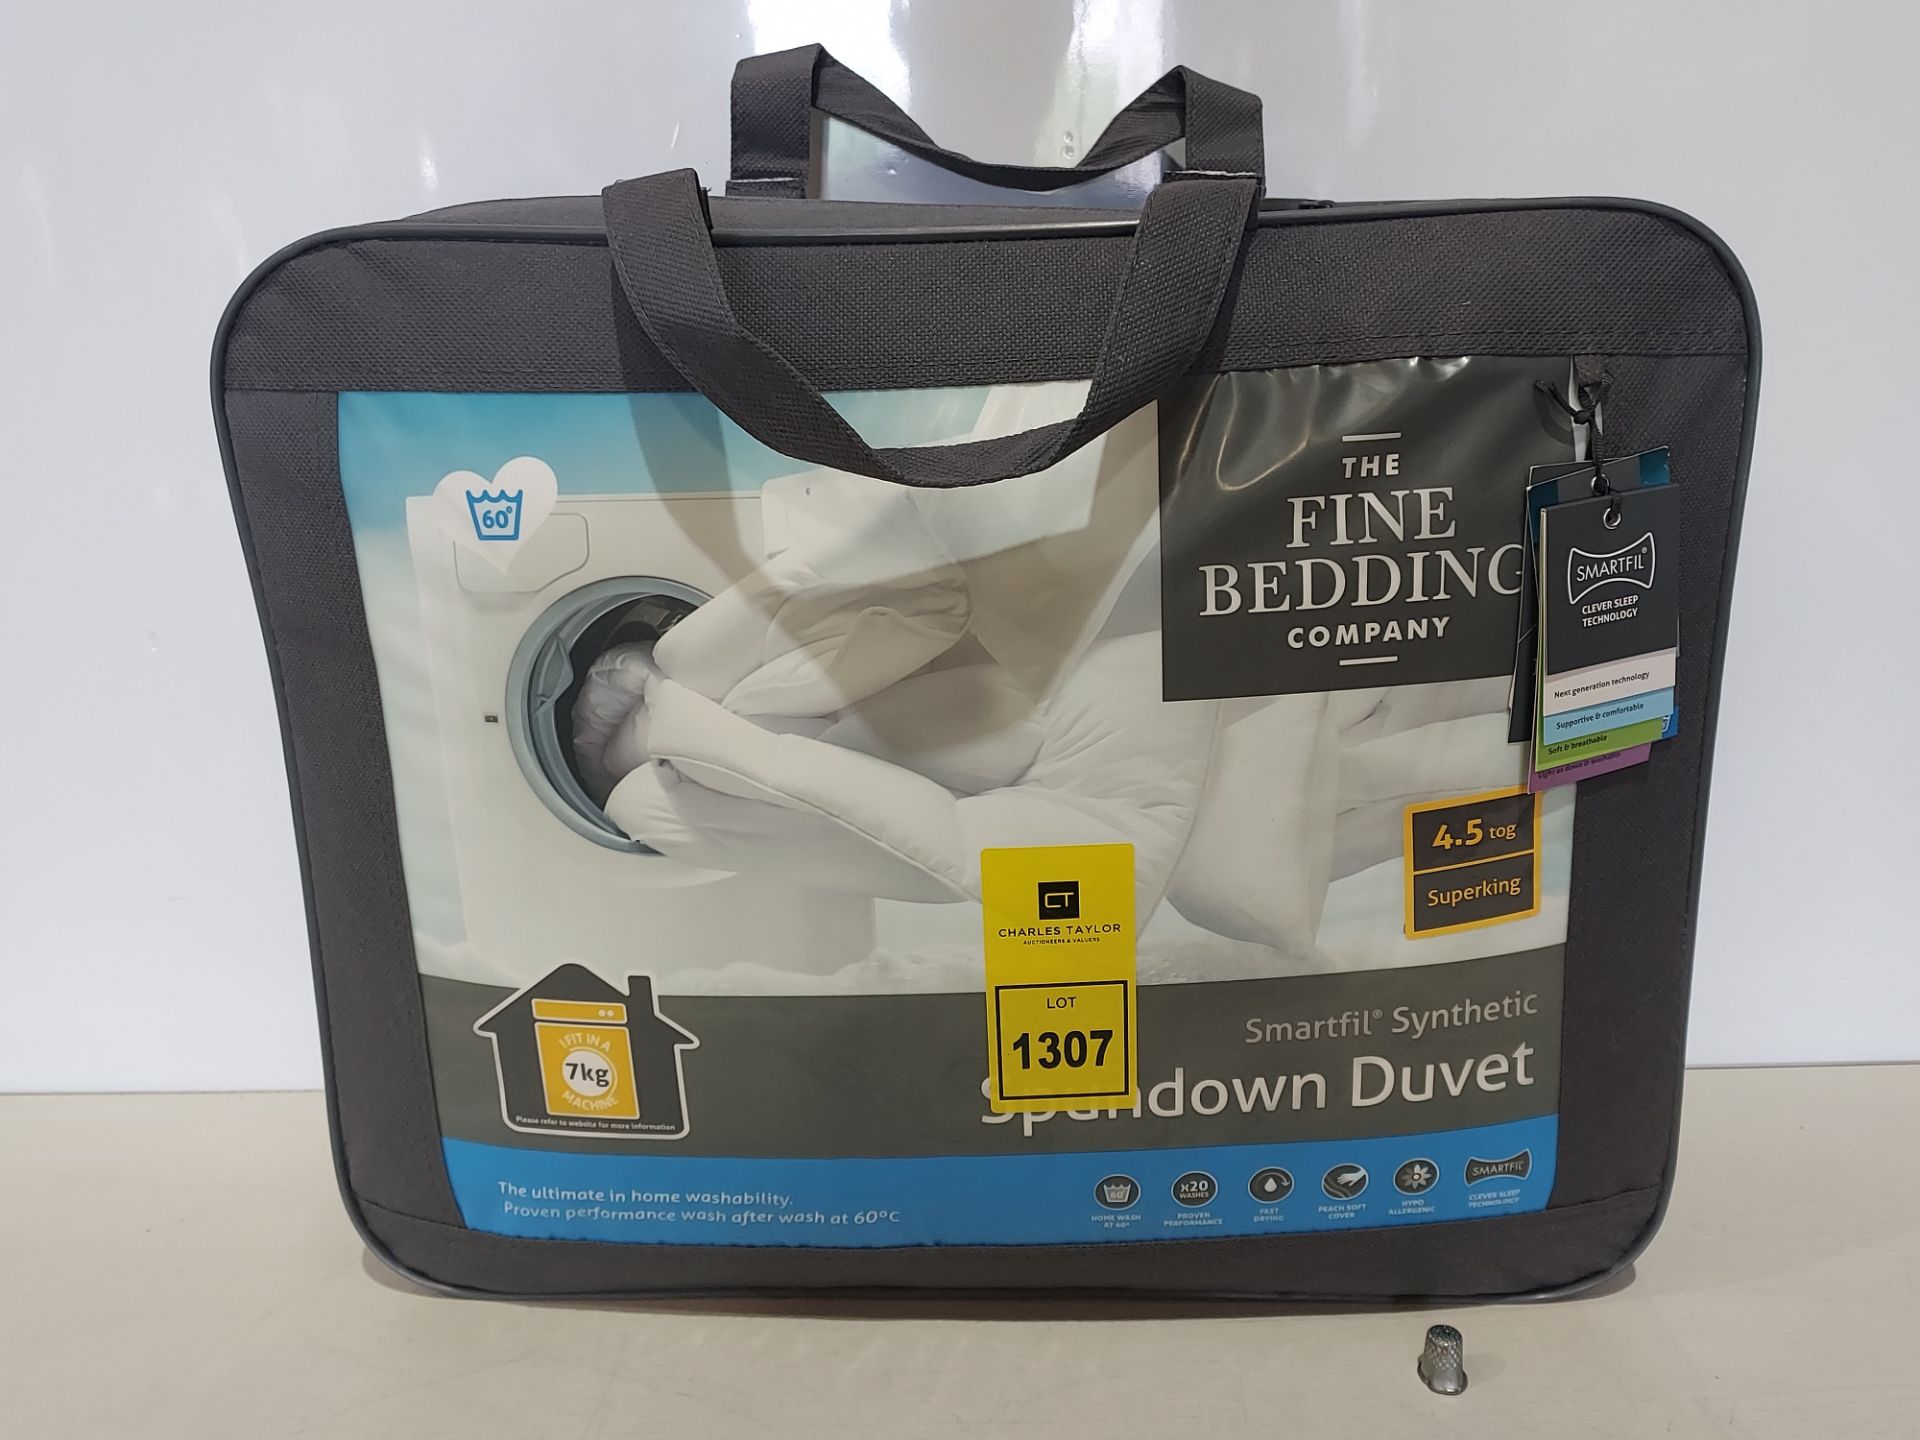 6 X BRAND NEW THE FINE BEDDING COMPANY SPUNDOWN DUVETS IN SUPERKING 4.5 TOG